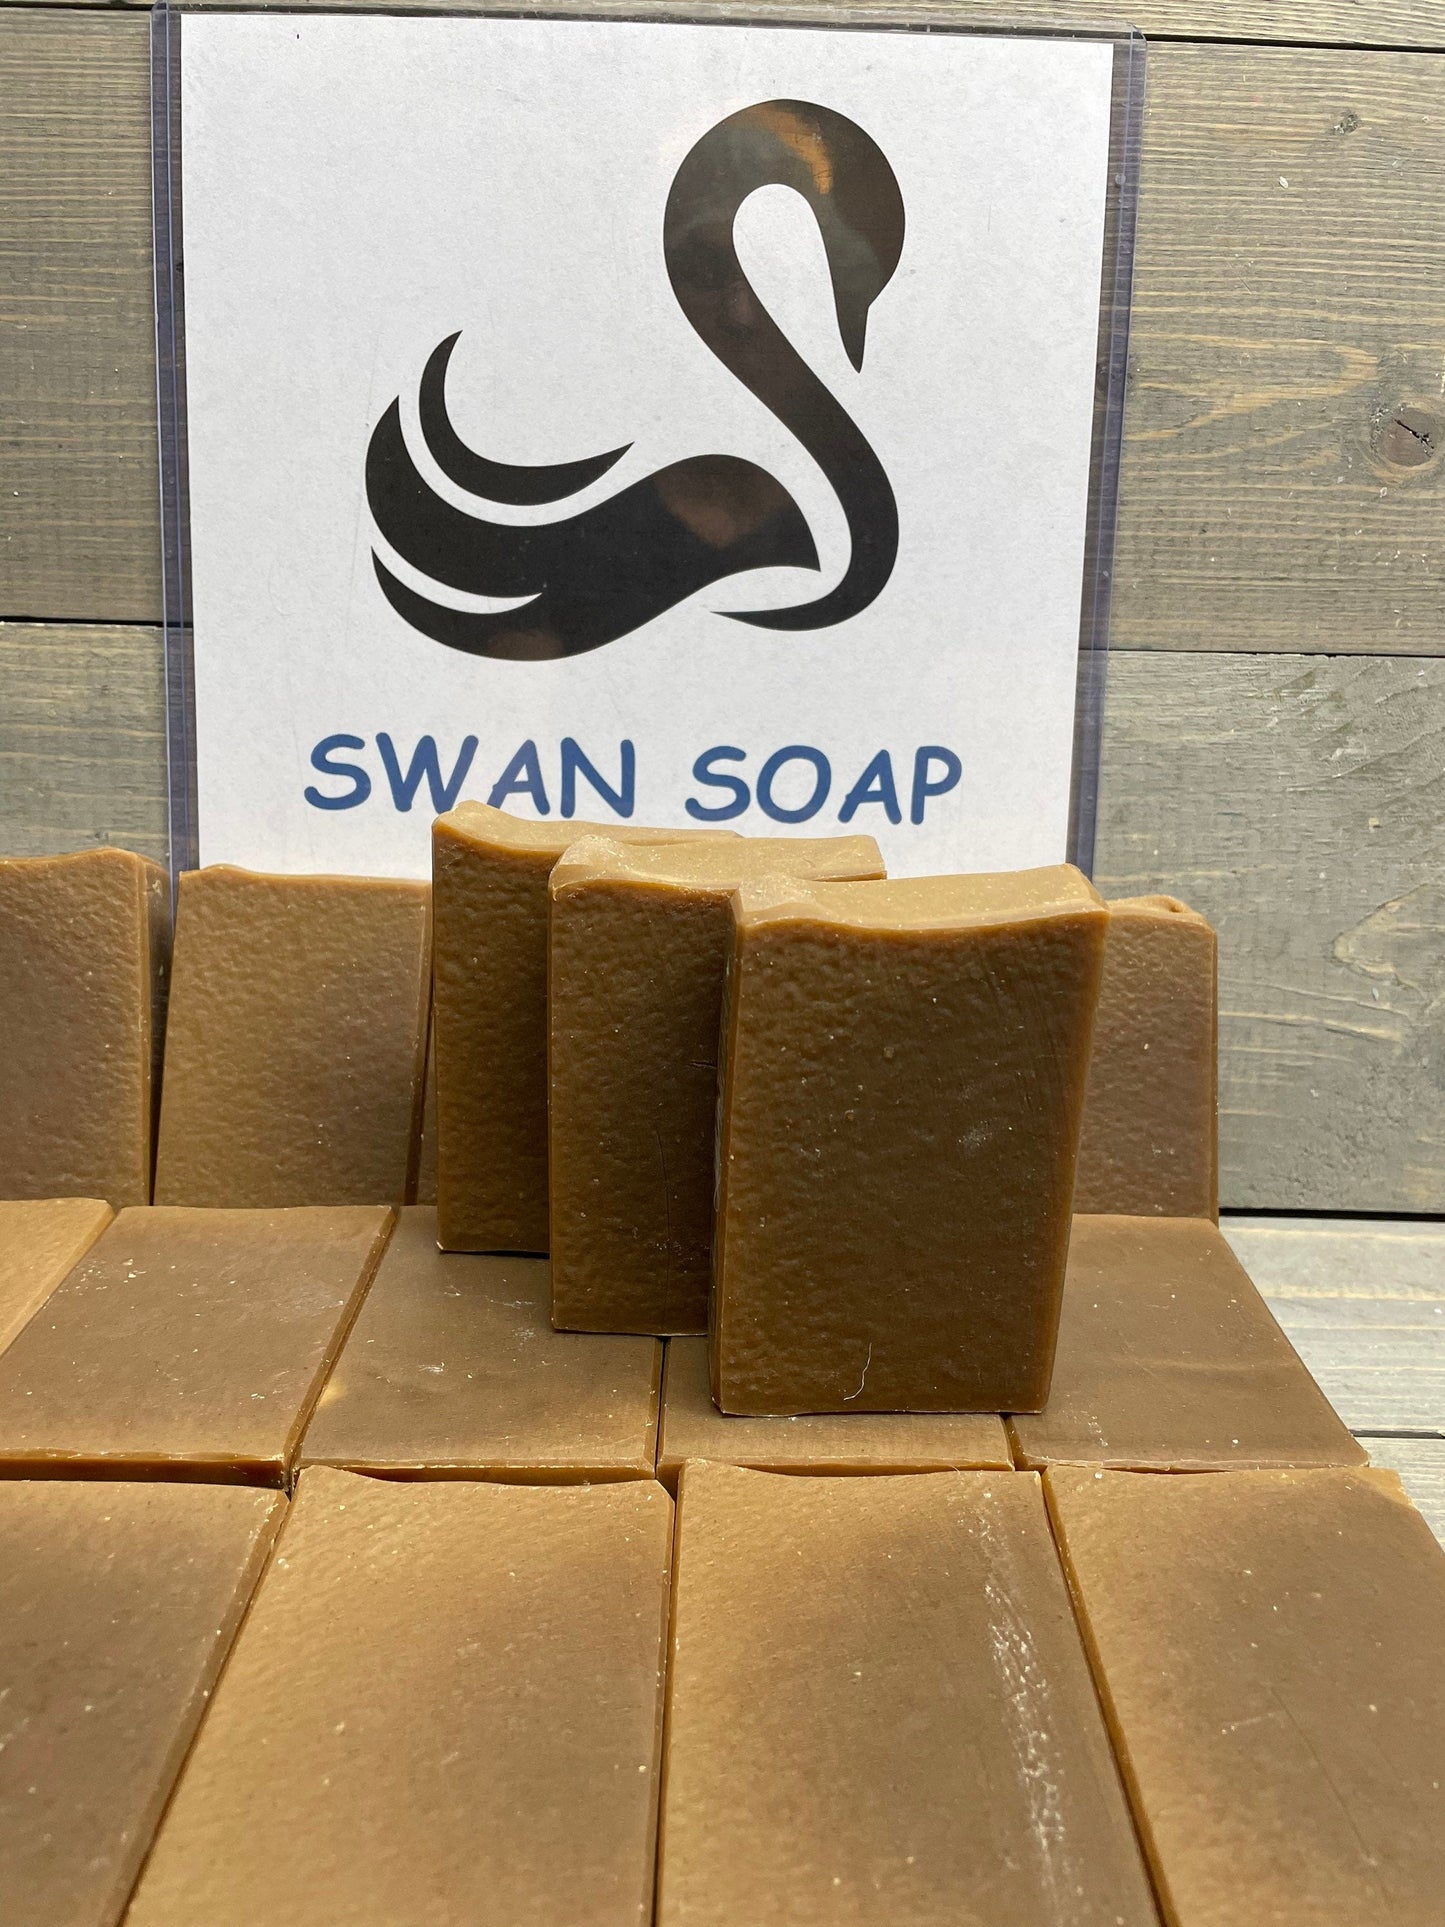 A photo showing detail of Pine Tar and Oatmeal Soap